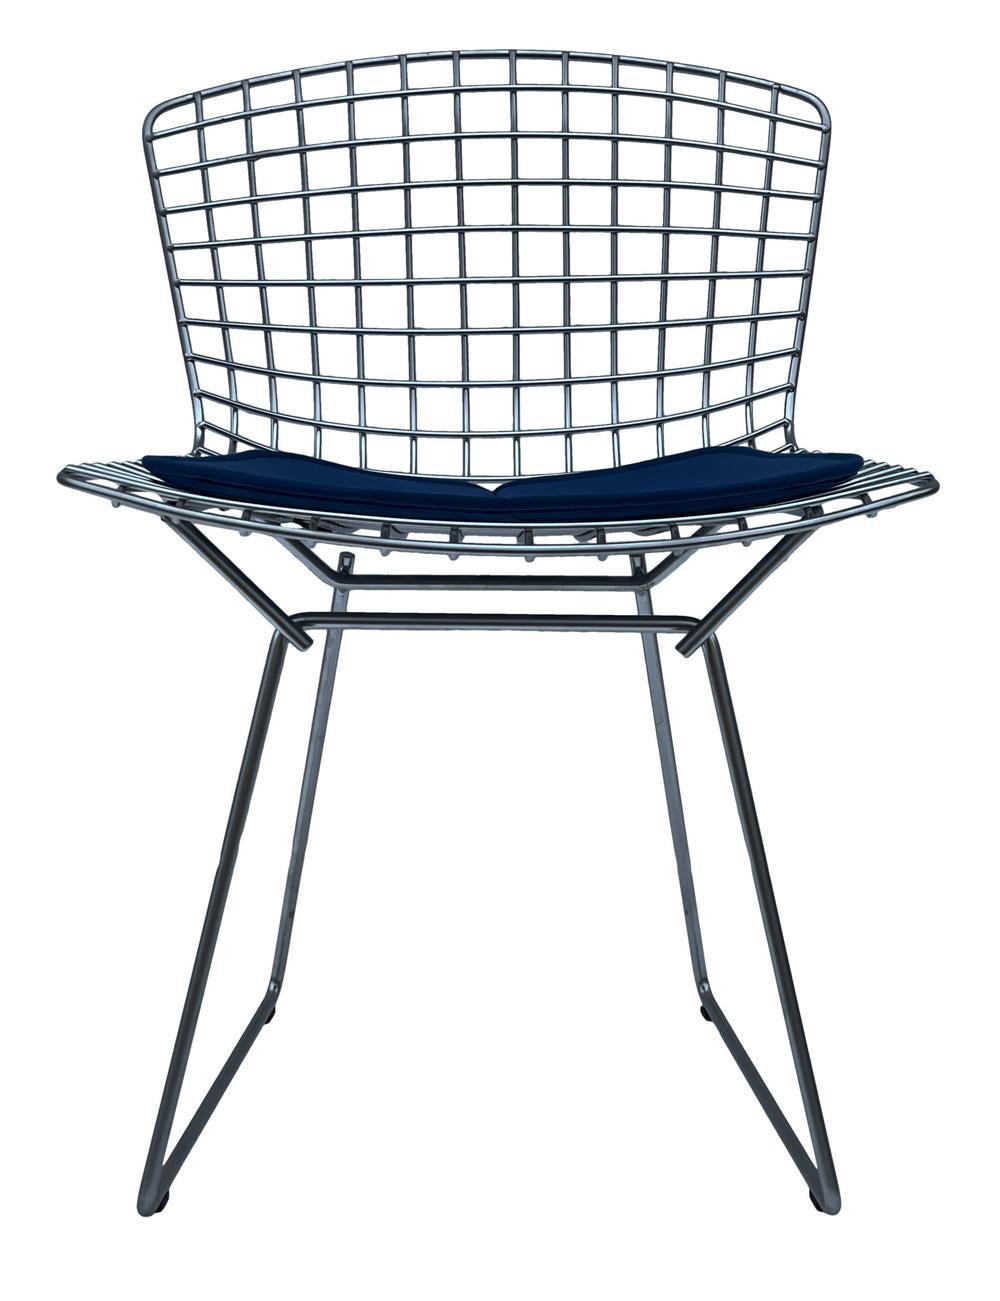 A classic design by Harry Bertoia for Knoll. It features steel frames with blue suede seat cushion. Manufacturer stamp on frame. Price includes the pair as shown.